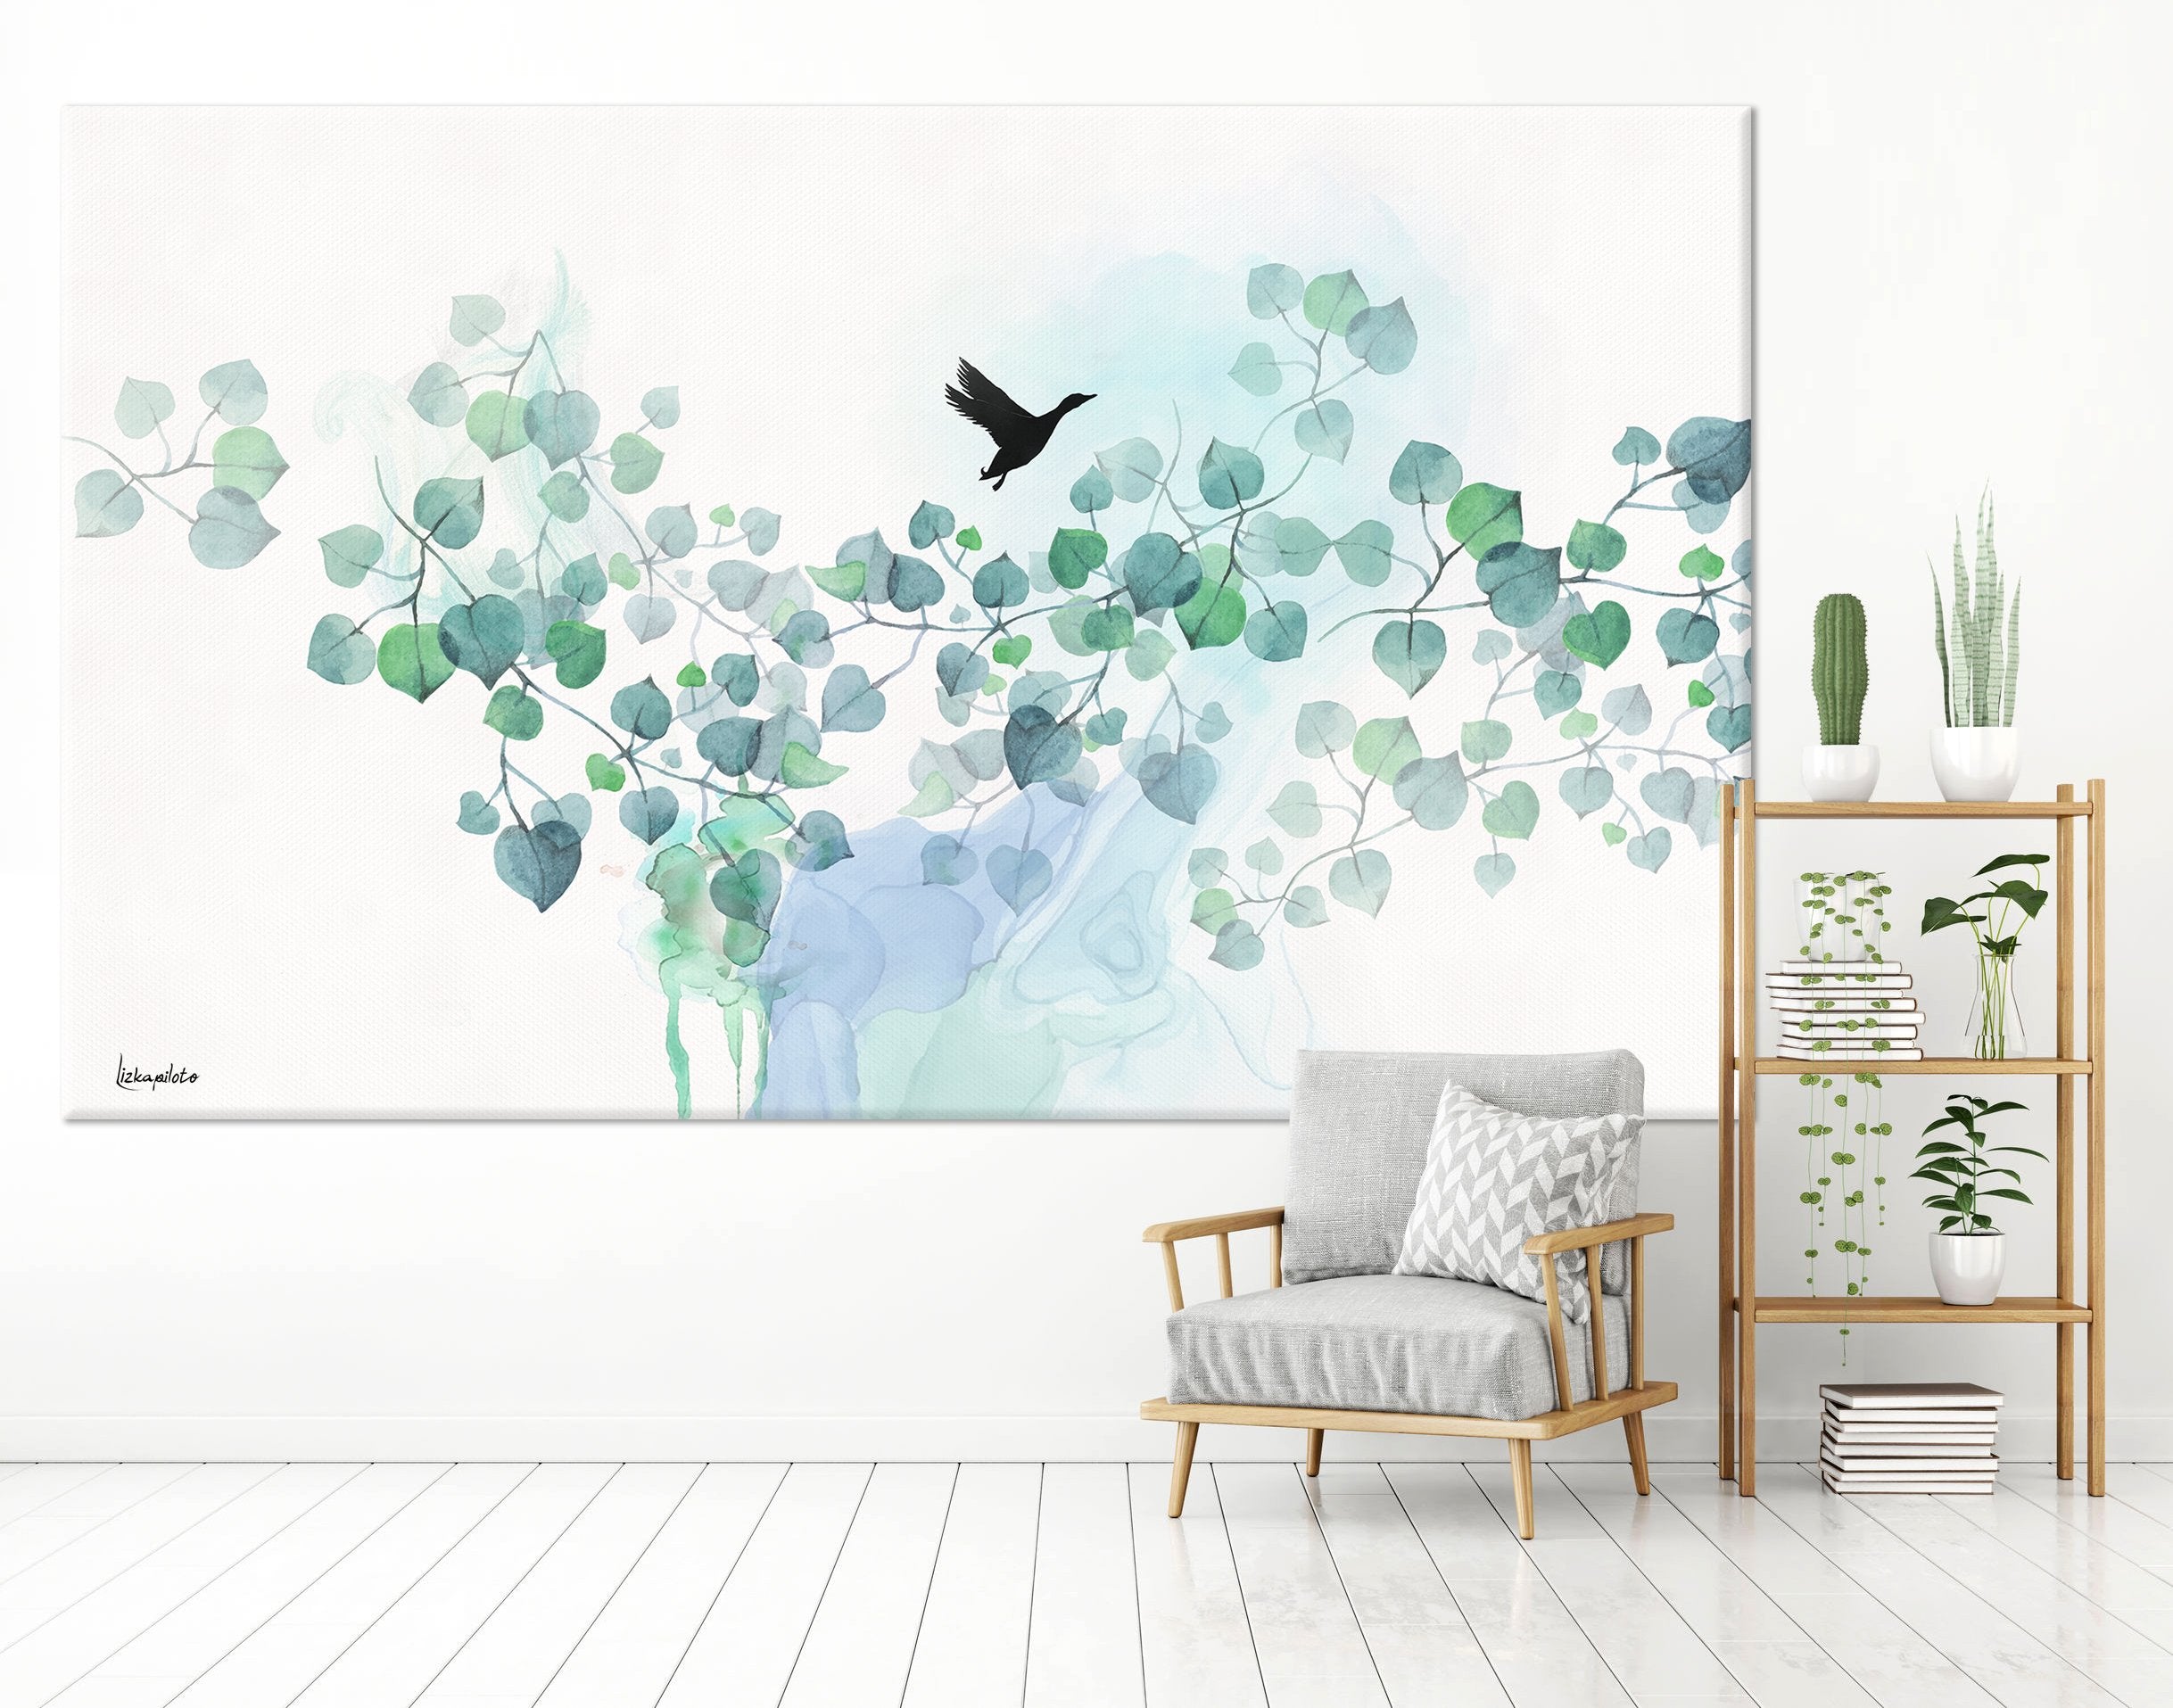 Turquoise watercolor painting of leaves and black bird - Liz Kapiloto Art & Design Large canvas painting of turquoise leaves, hanging on a white wall